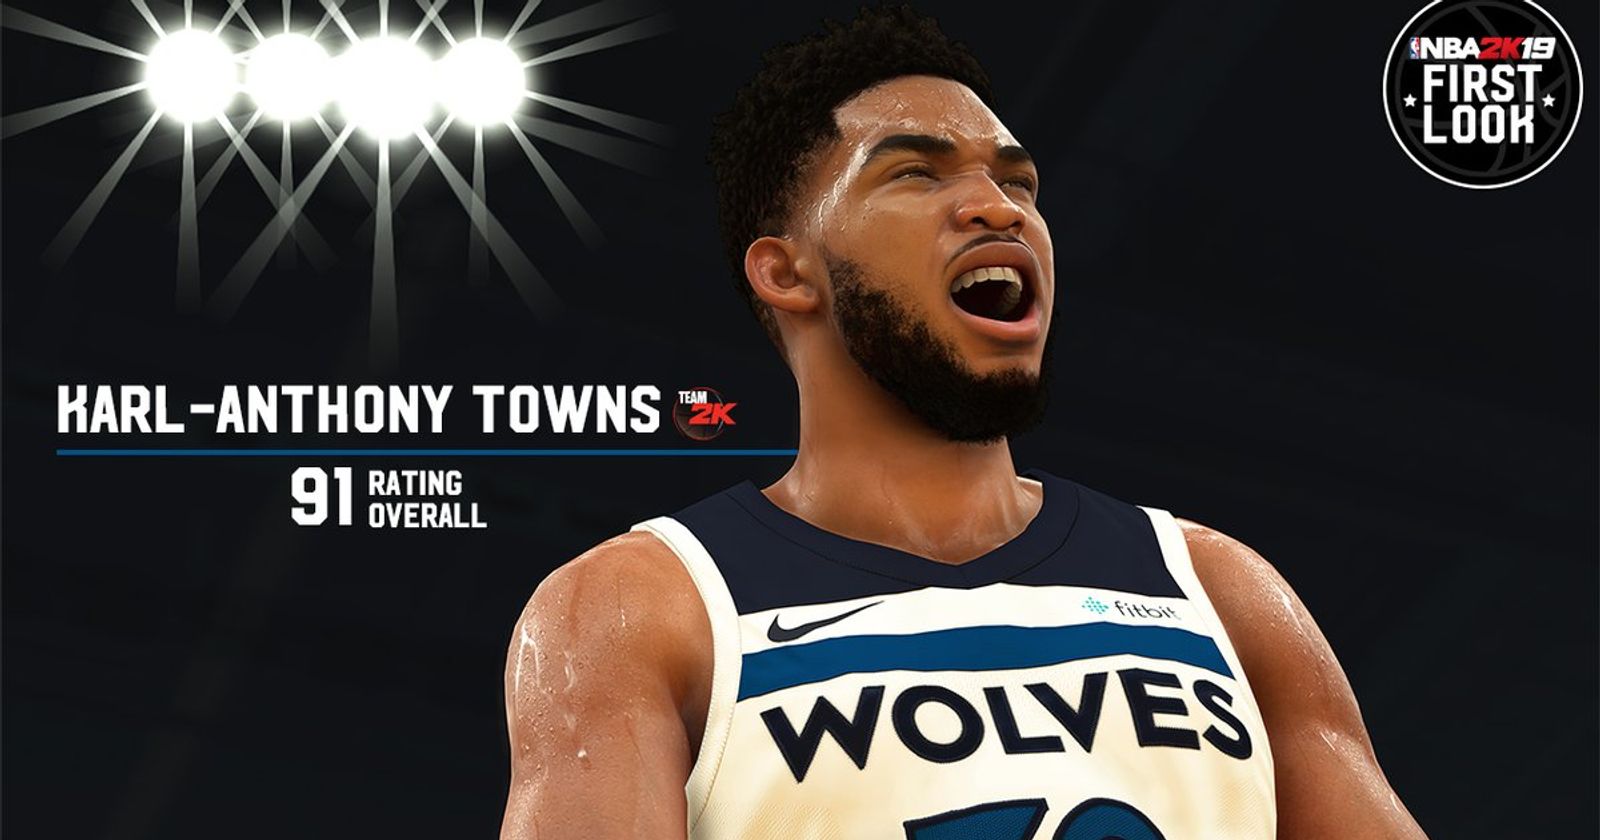 Here are some of the Wolves 2k ratings - KAT is at an 89 still